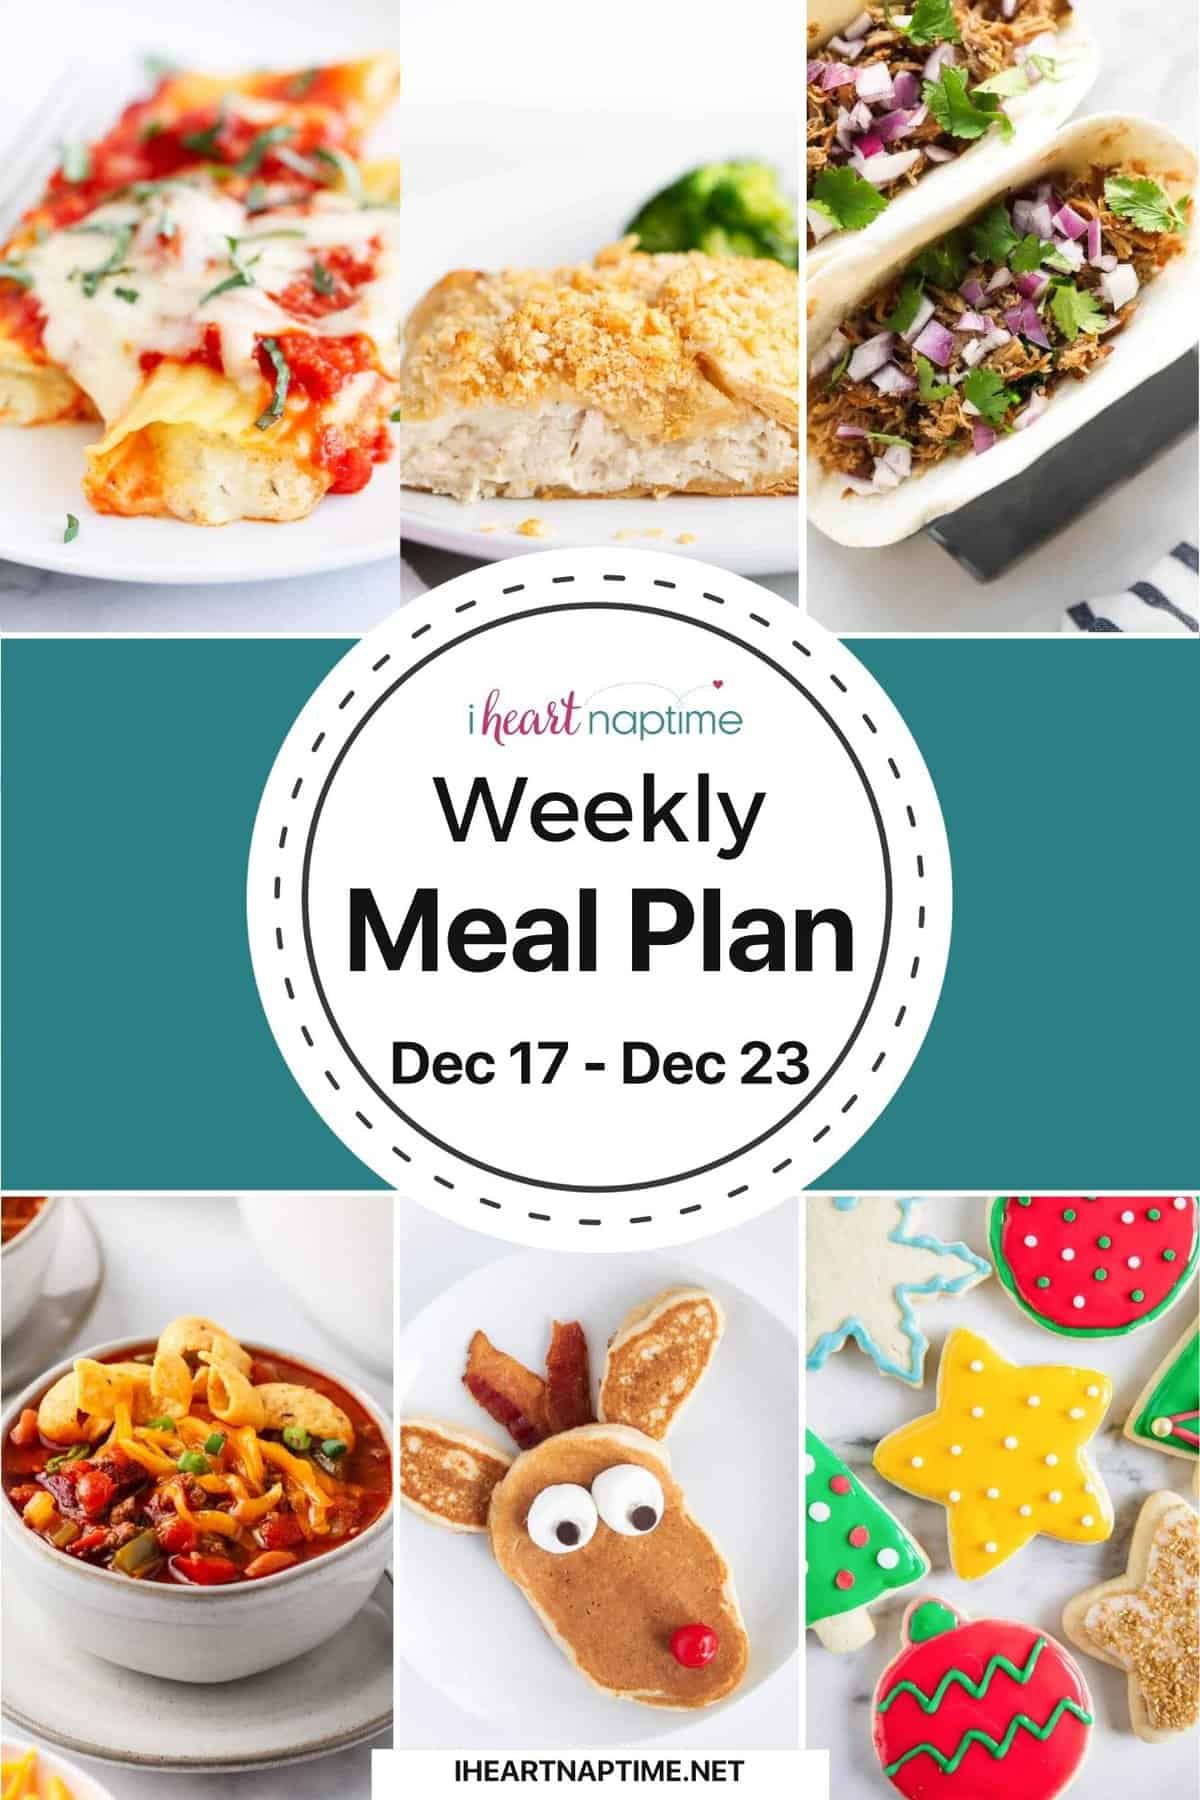 Weekly meal plan from I Heart Naptime.